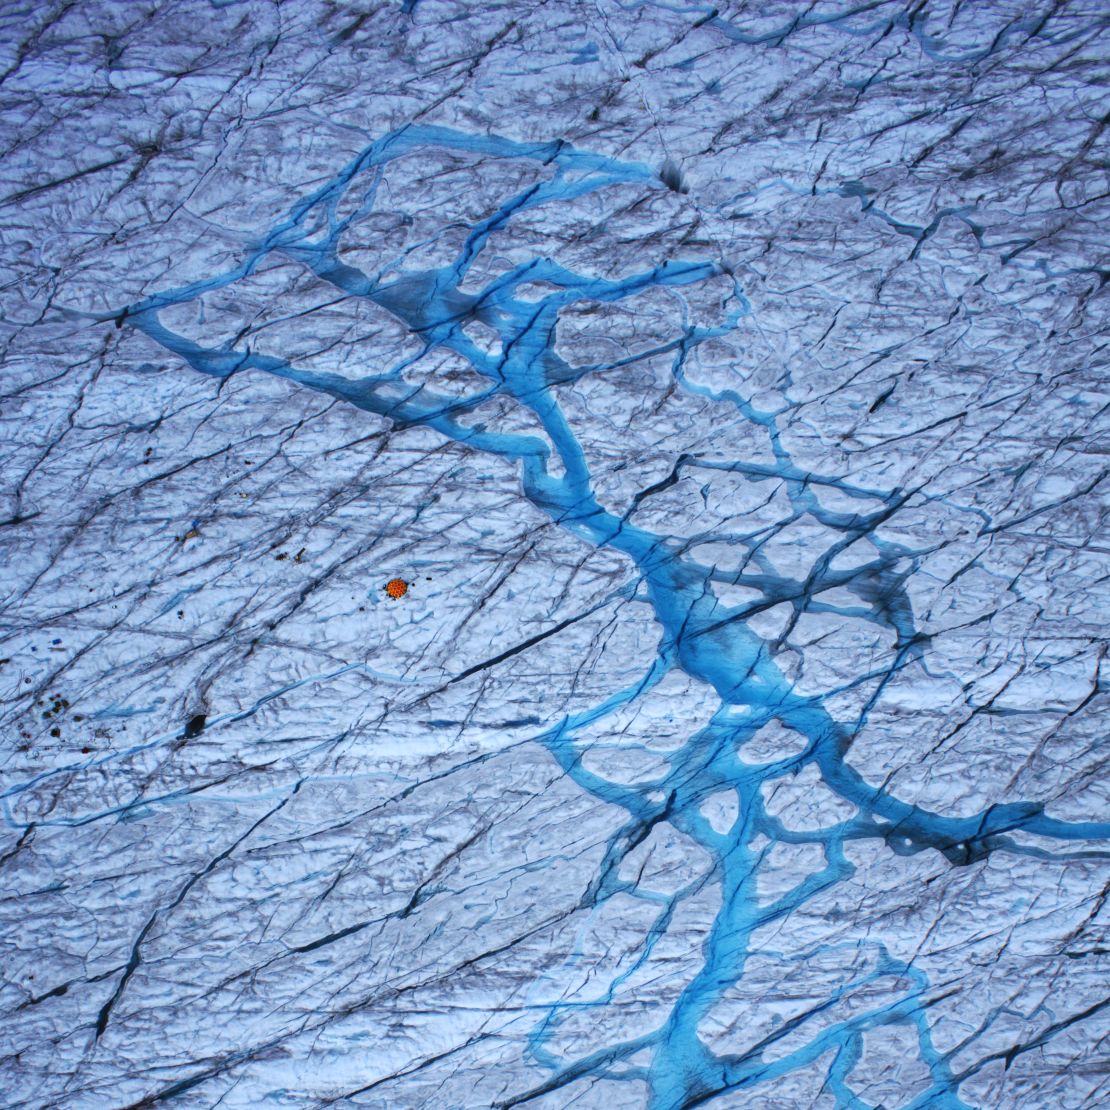 Meltwater on the surface of the ice sheet falls through cracks to the base.